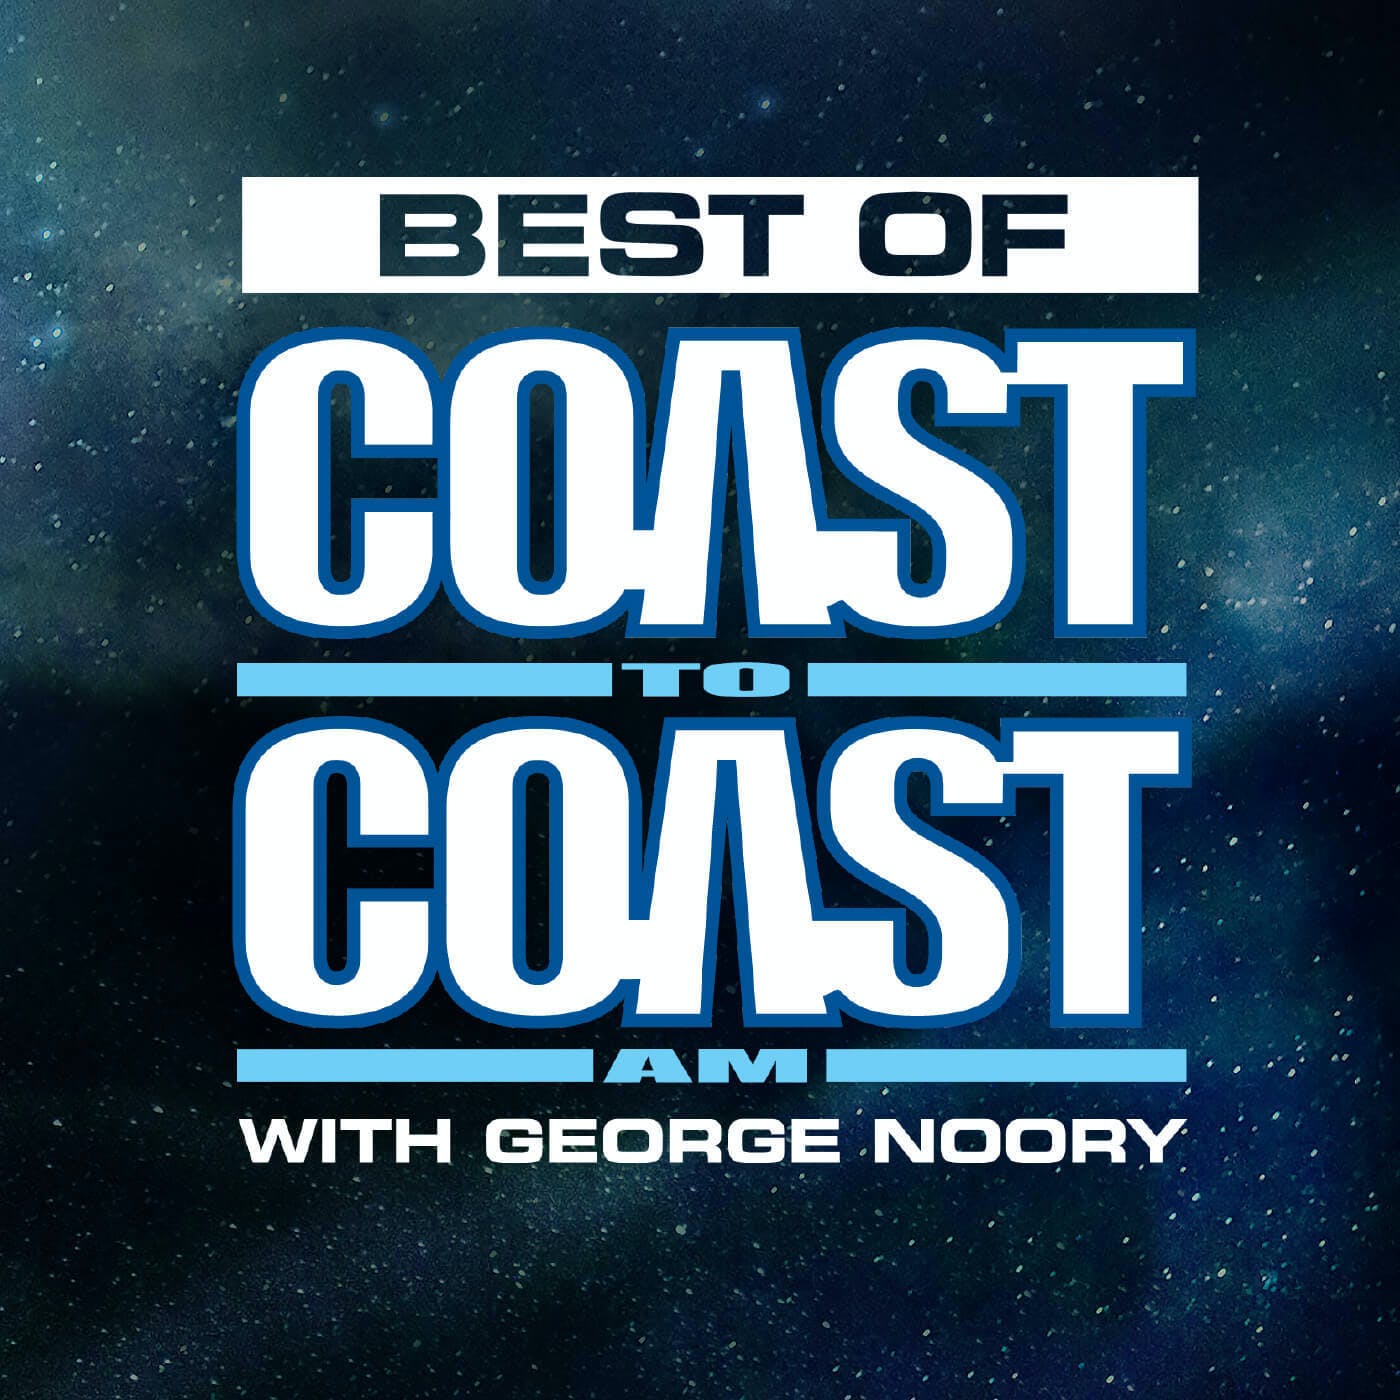 The Miracles Of Easter - Best of Coast to Coast AM - 3/30/24